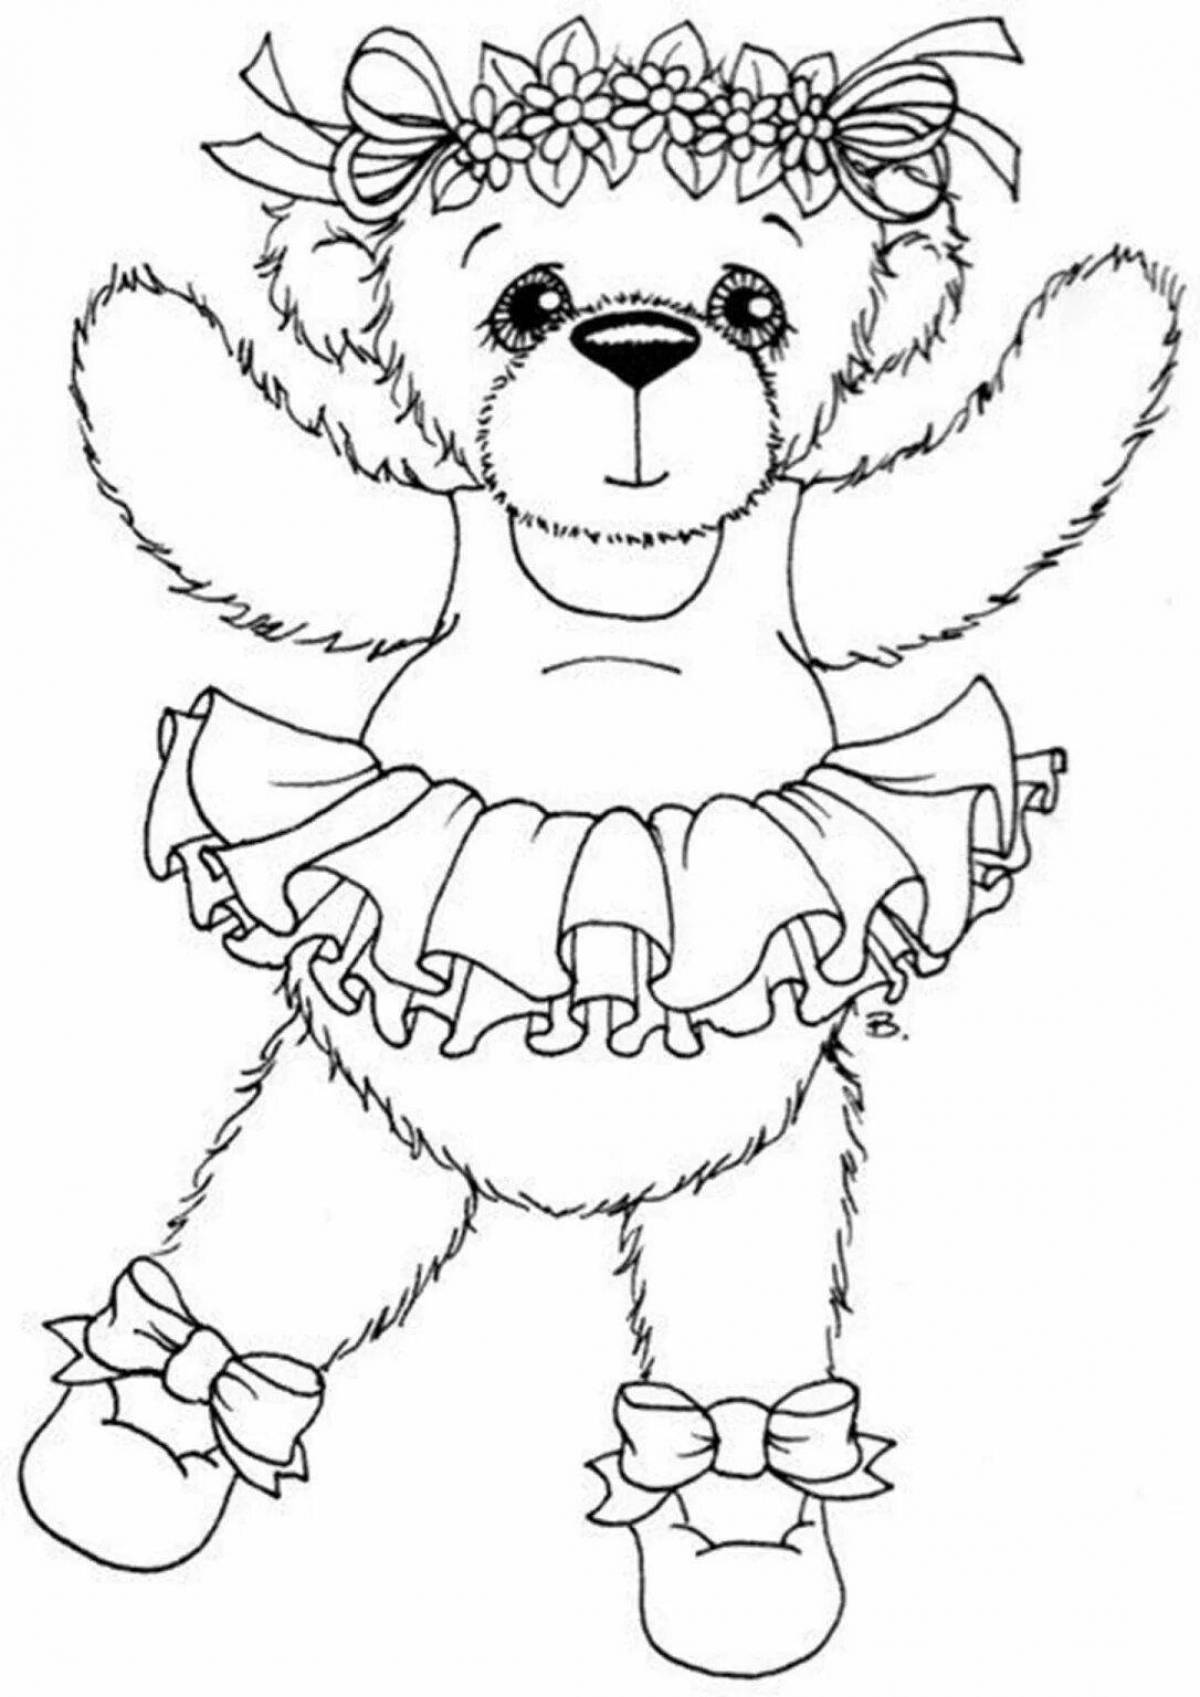 Coloring wild bear with a bow